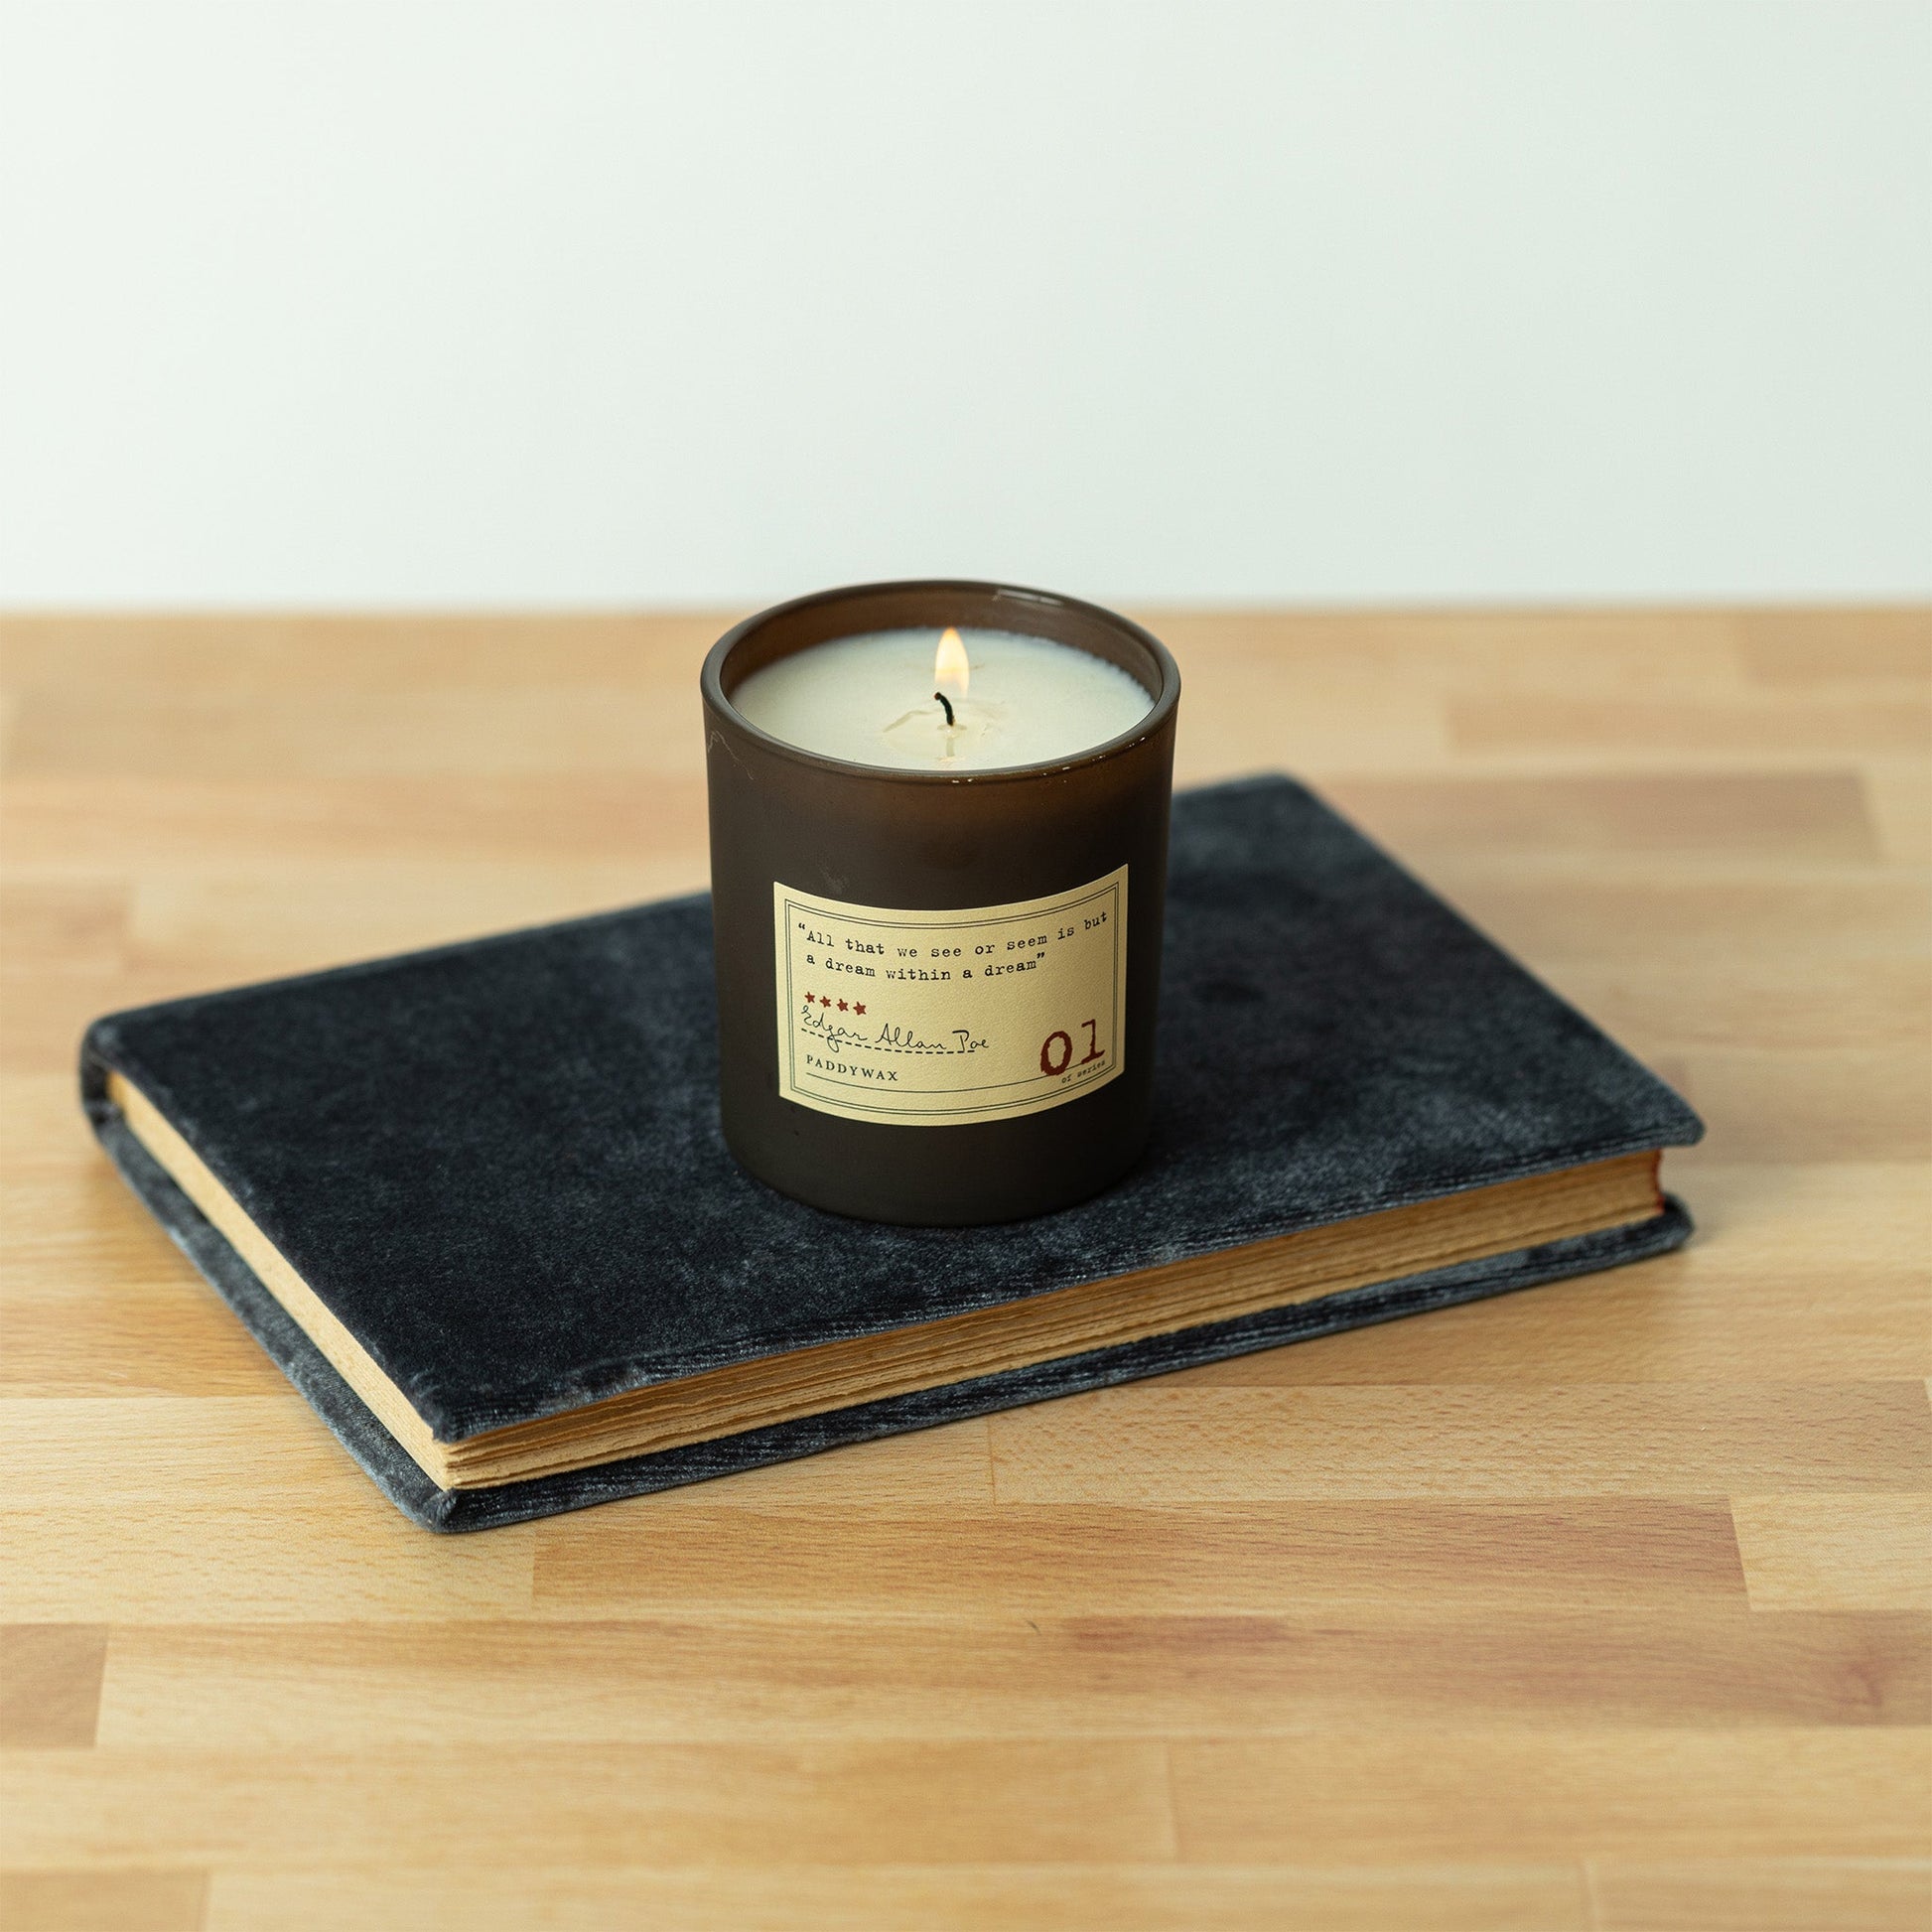 Library Edgar Allan Poe soy wax candle with single wick burning on top of book on hardwood surface